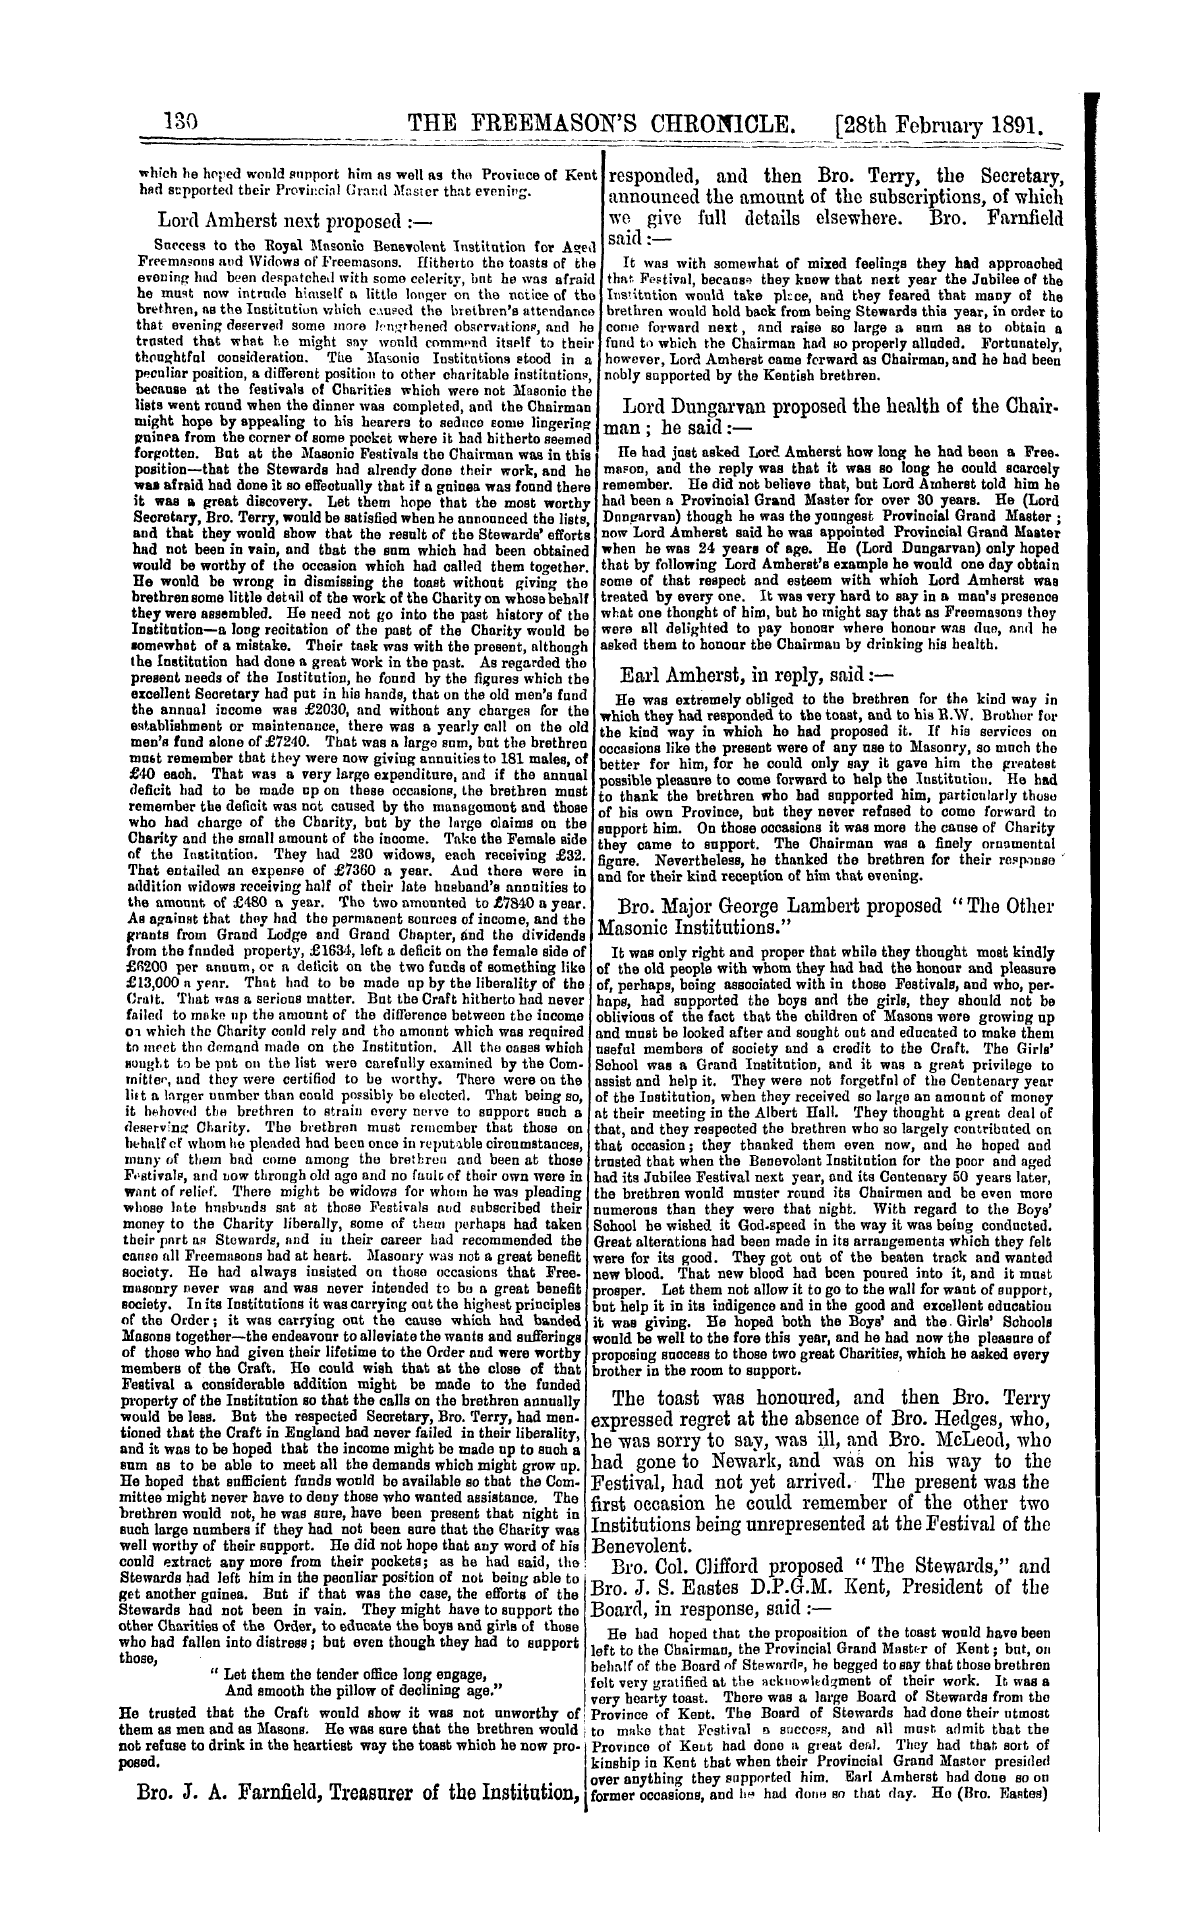 The Freemason's Chronicle: 1891-02-28 - The Festival Of The Benevolent Institution.